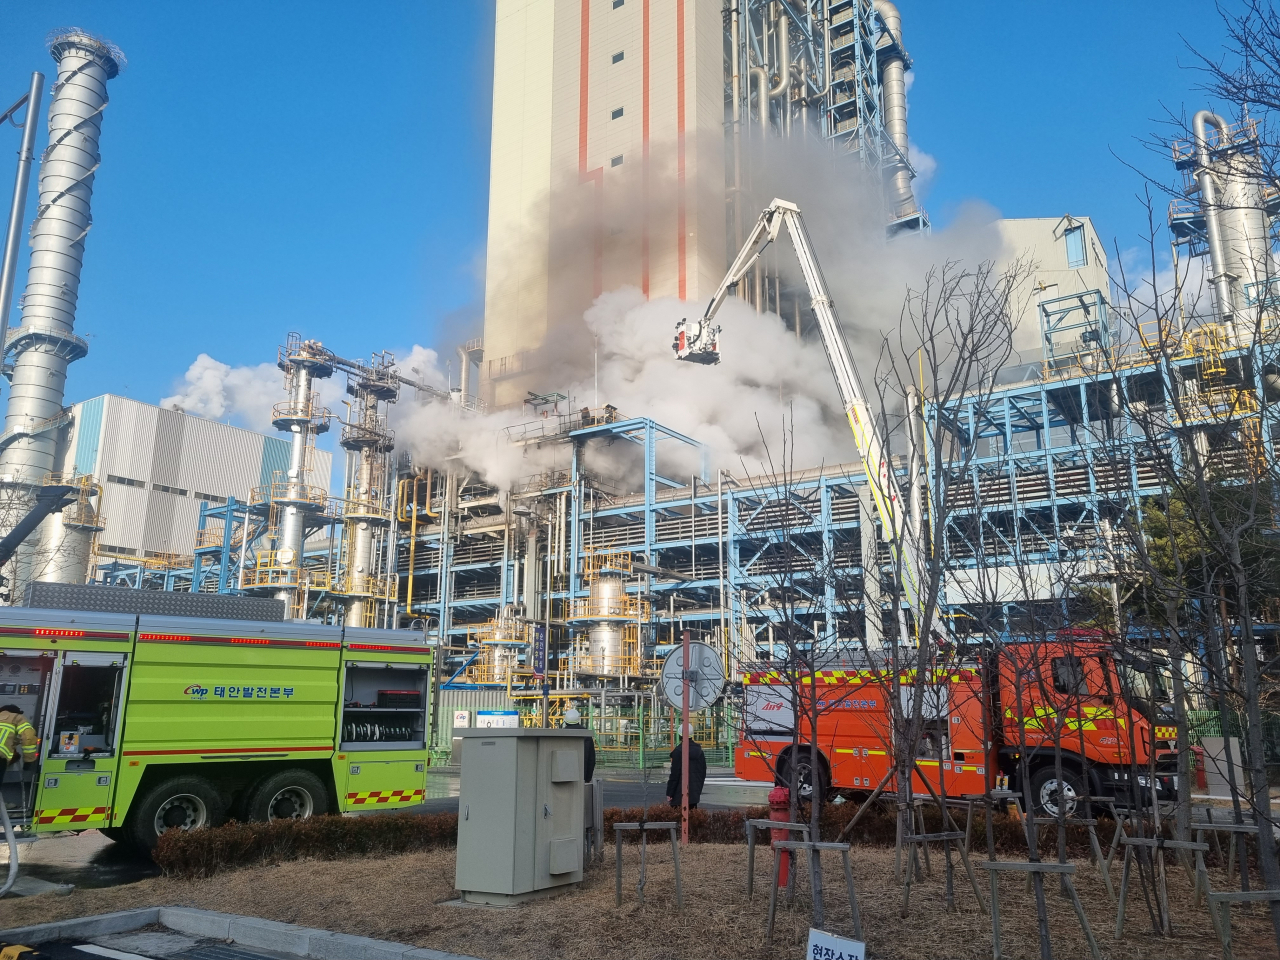 Firefighters put out a fire at a coal-fired power plant in Taean, South Chungcheong Province, on Sunday. (Taean Fire Station)